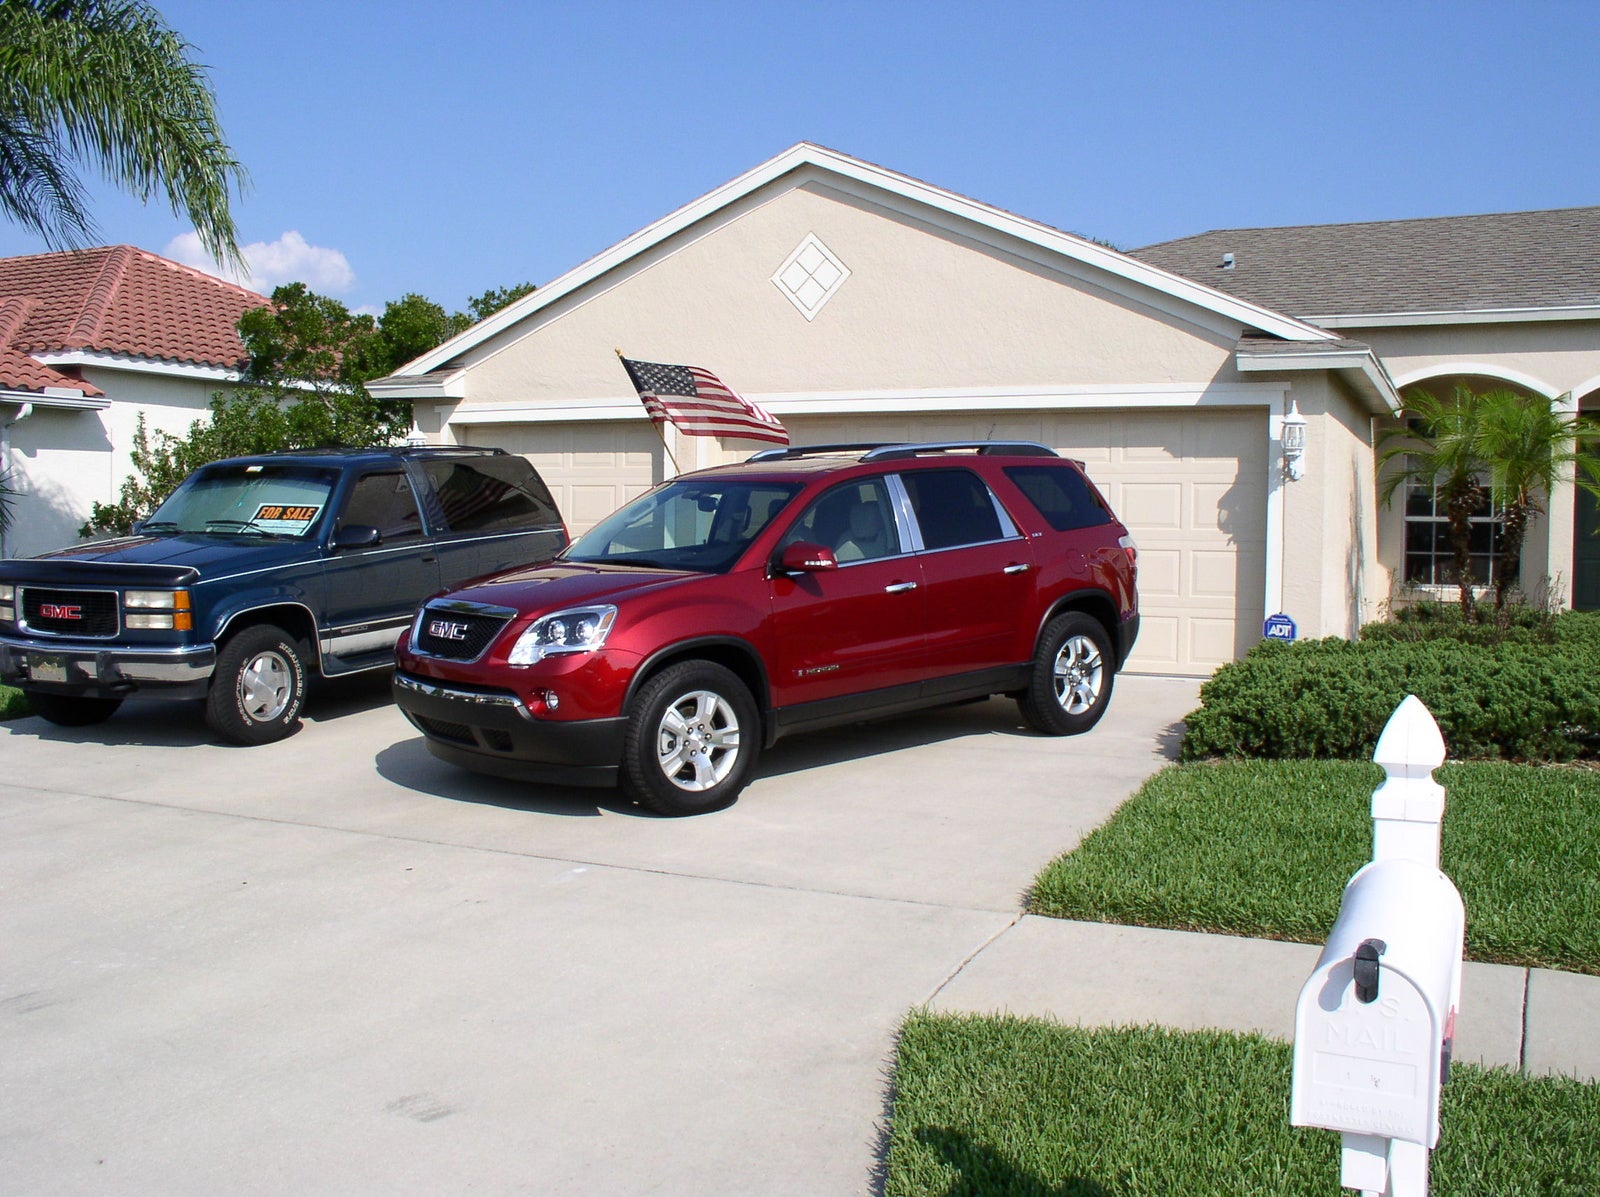 2008 Gmc acadia review consumer reports #4